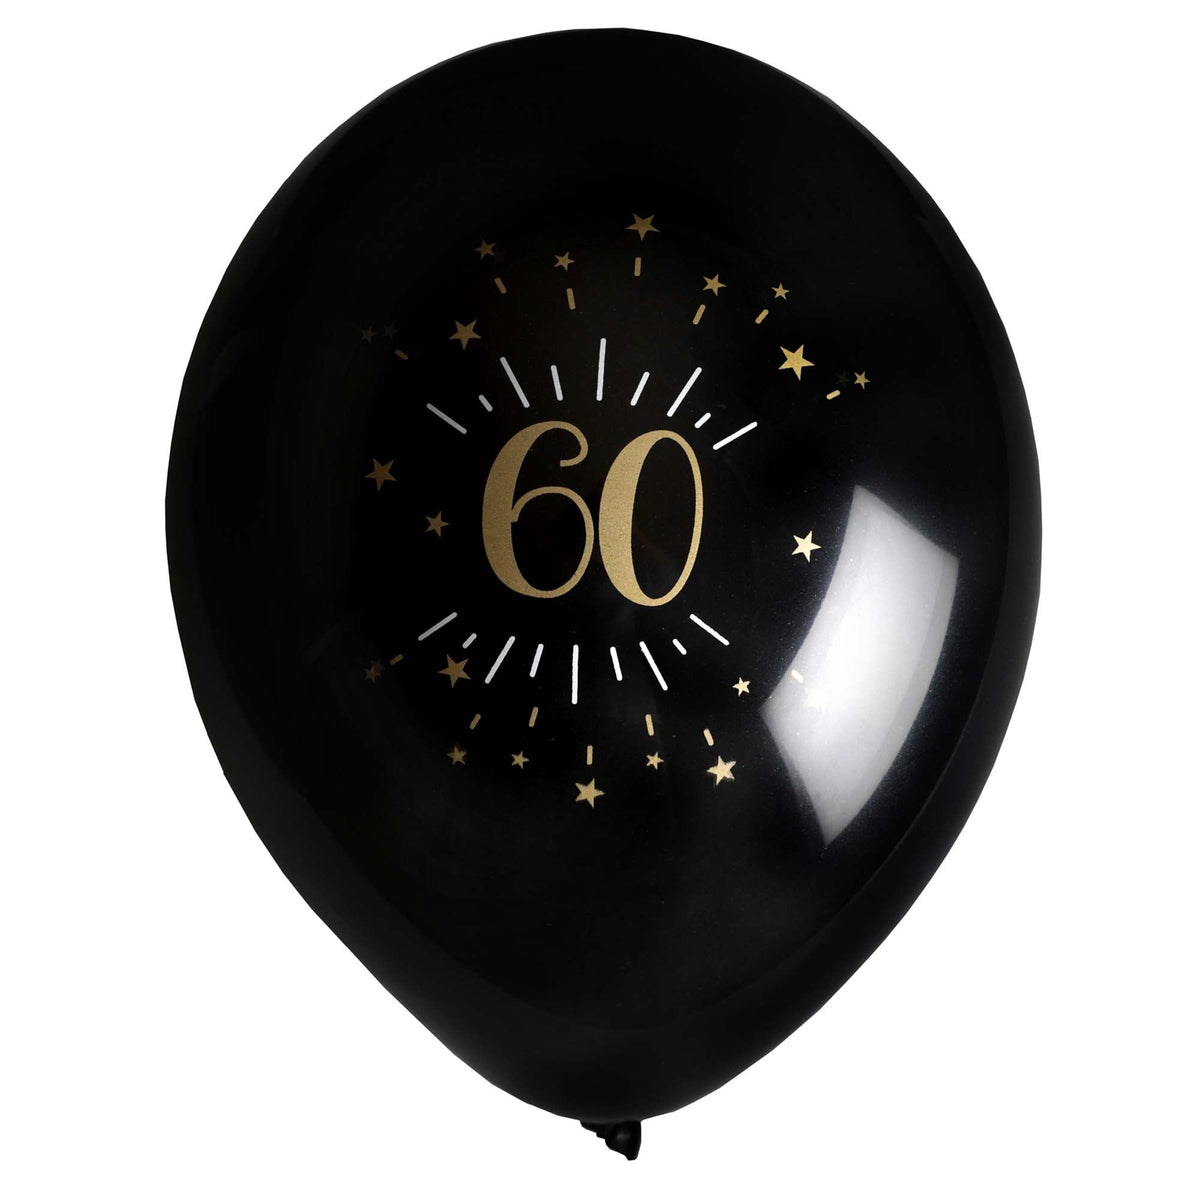 SANTEX Age Specific Birthday Black and Gold 60th Birthday Latex Balloons, 12 Inches, 6 Count 3660380070436